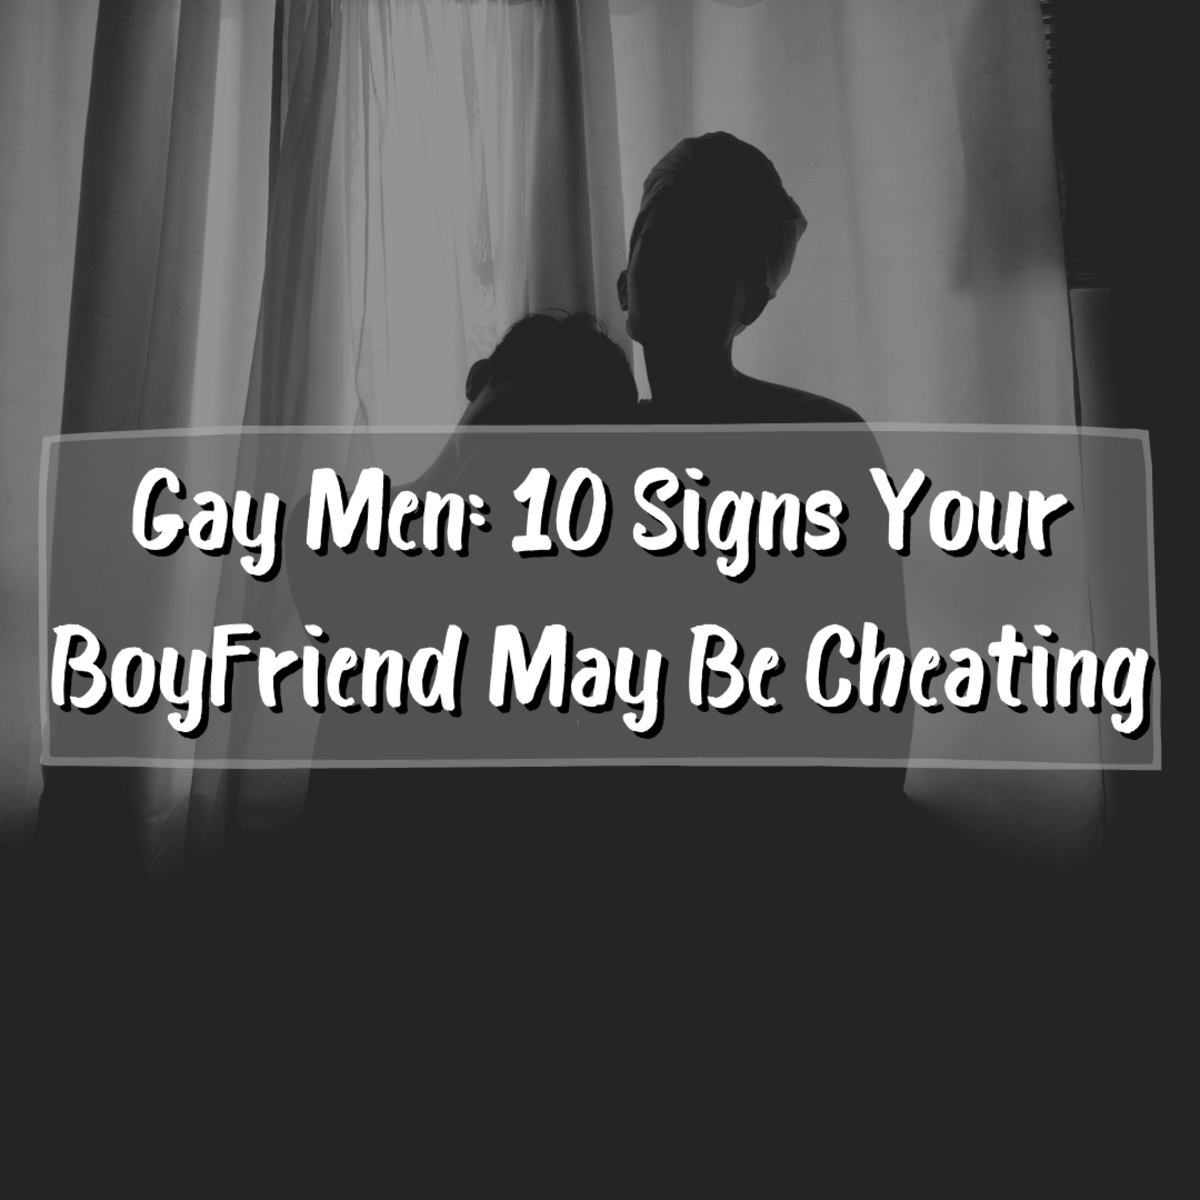 Gay Men: 10 Warning Signs Your Boyfriend May Be Cheating